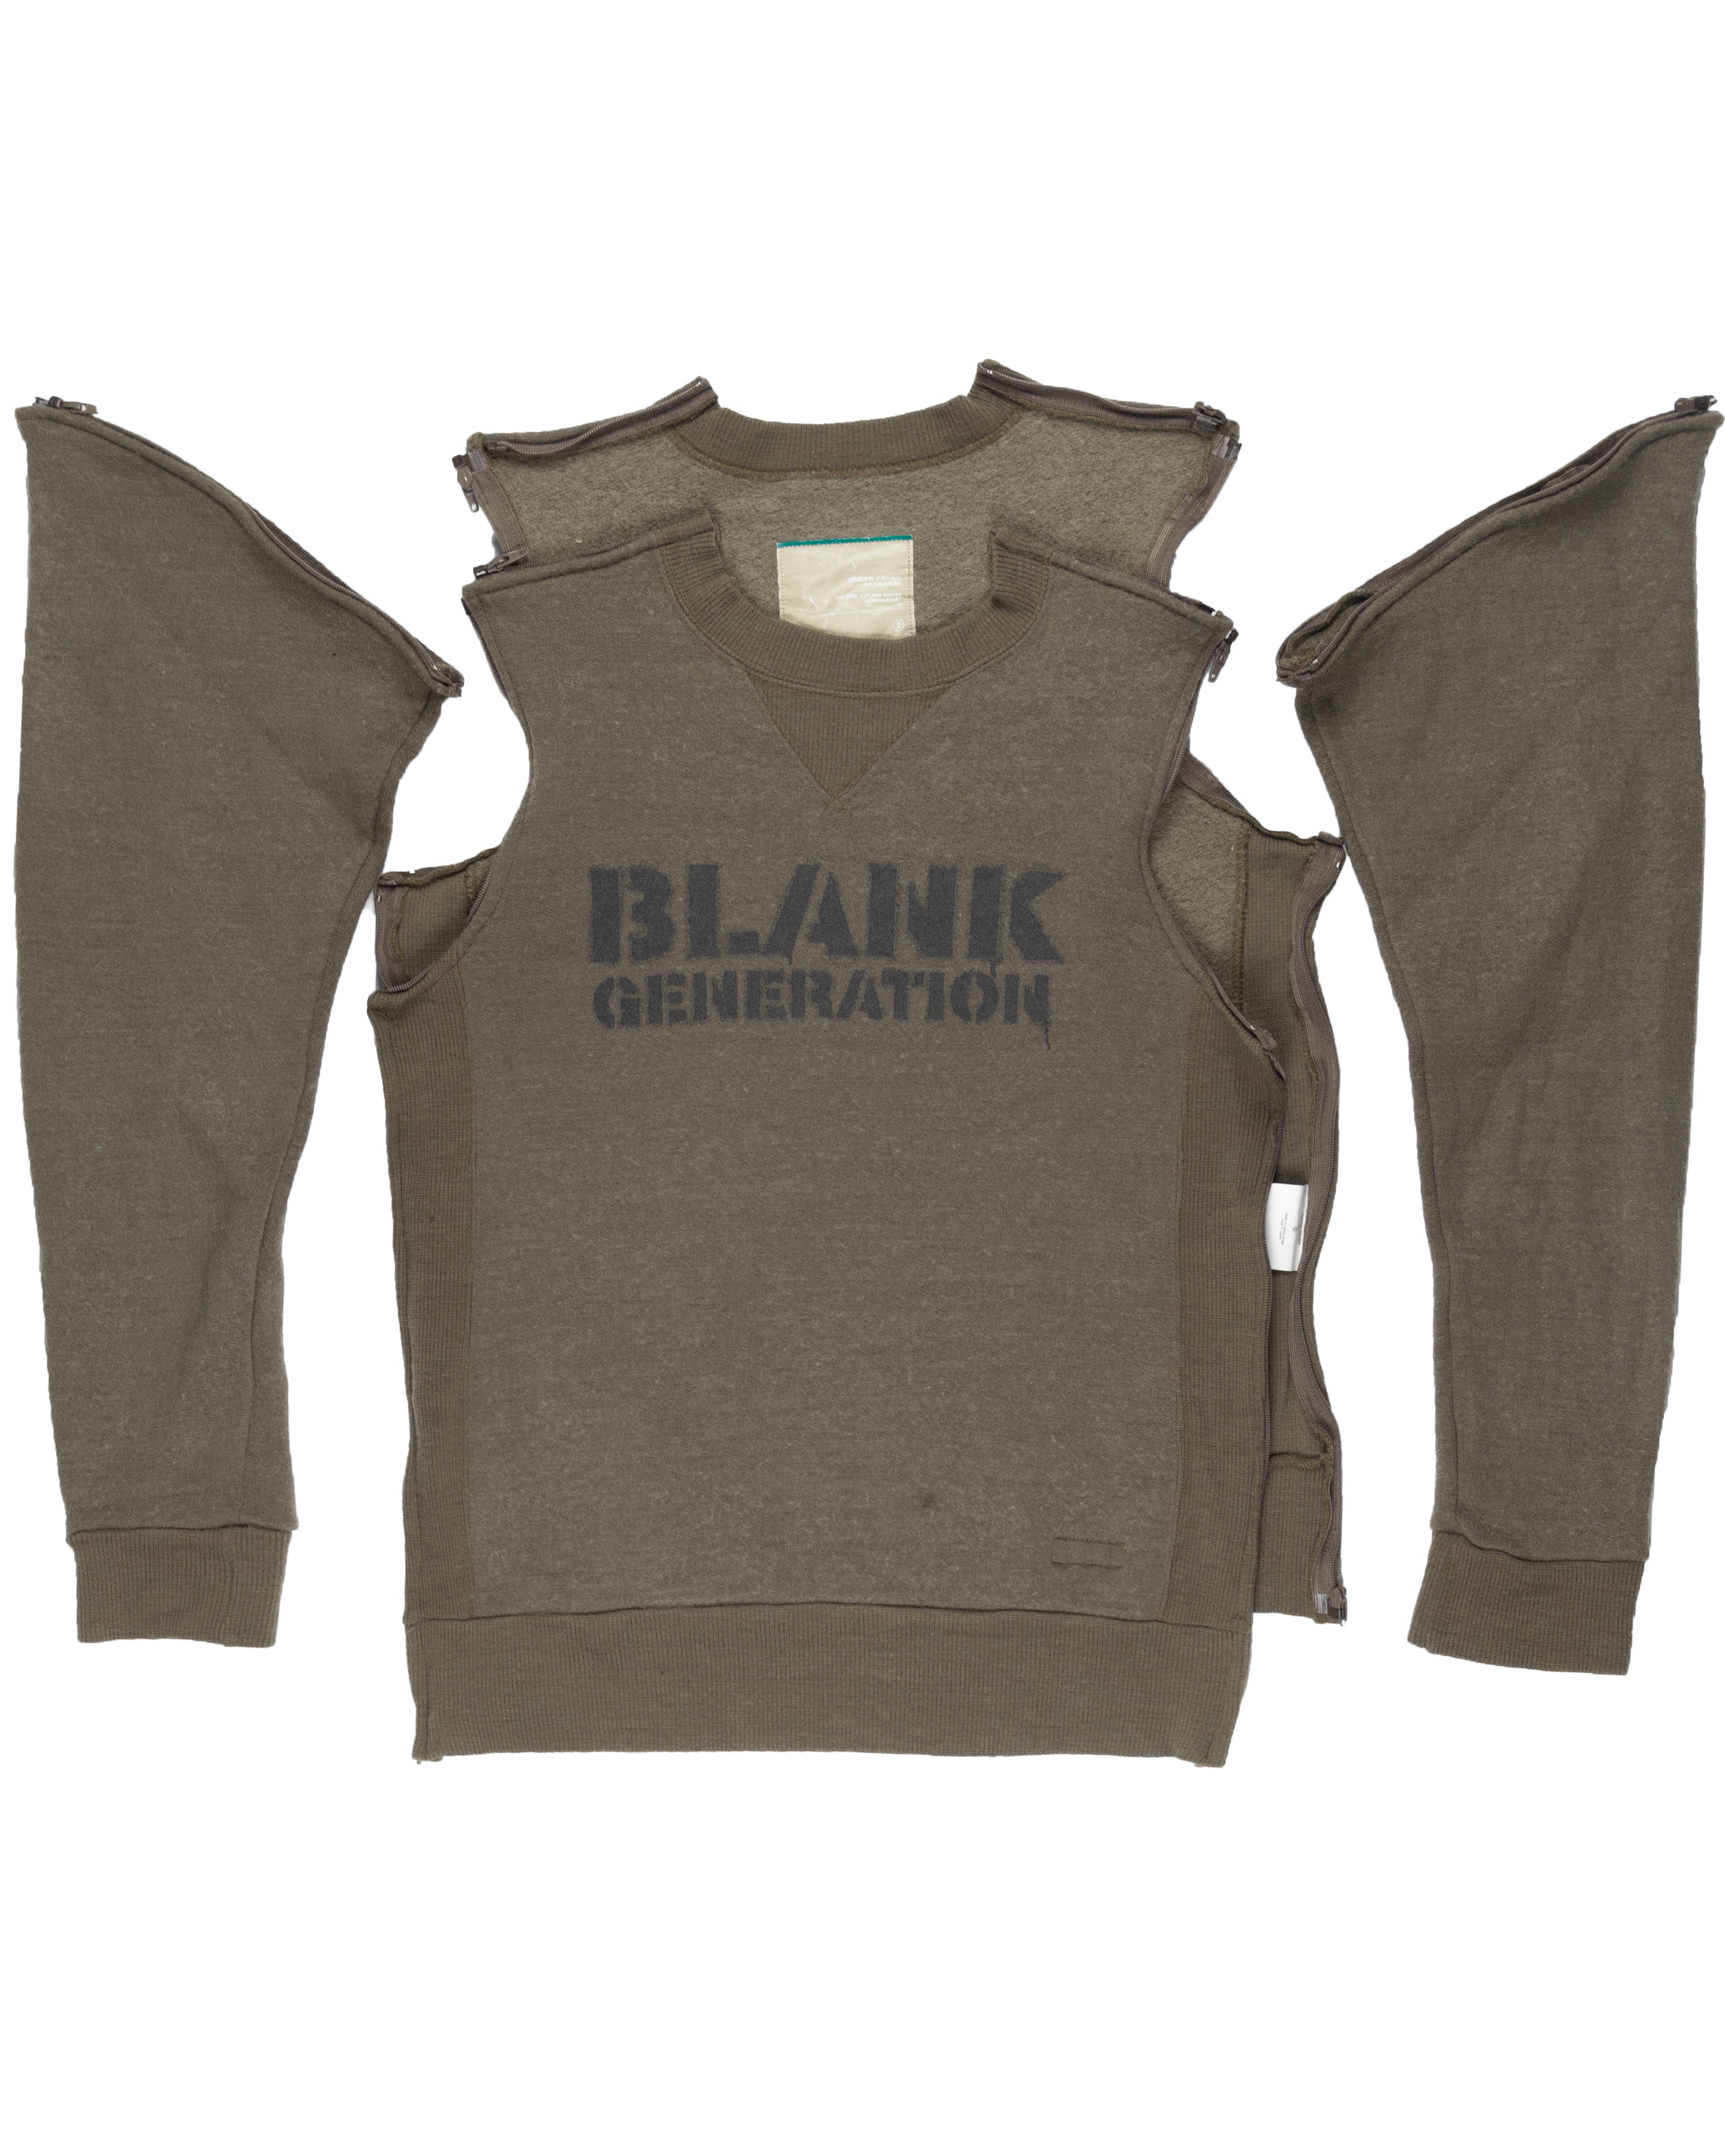 Undercover Blank Generation Olive Sweater - AW99 “Ambivalence”